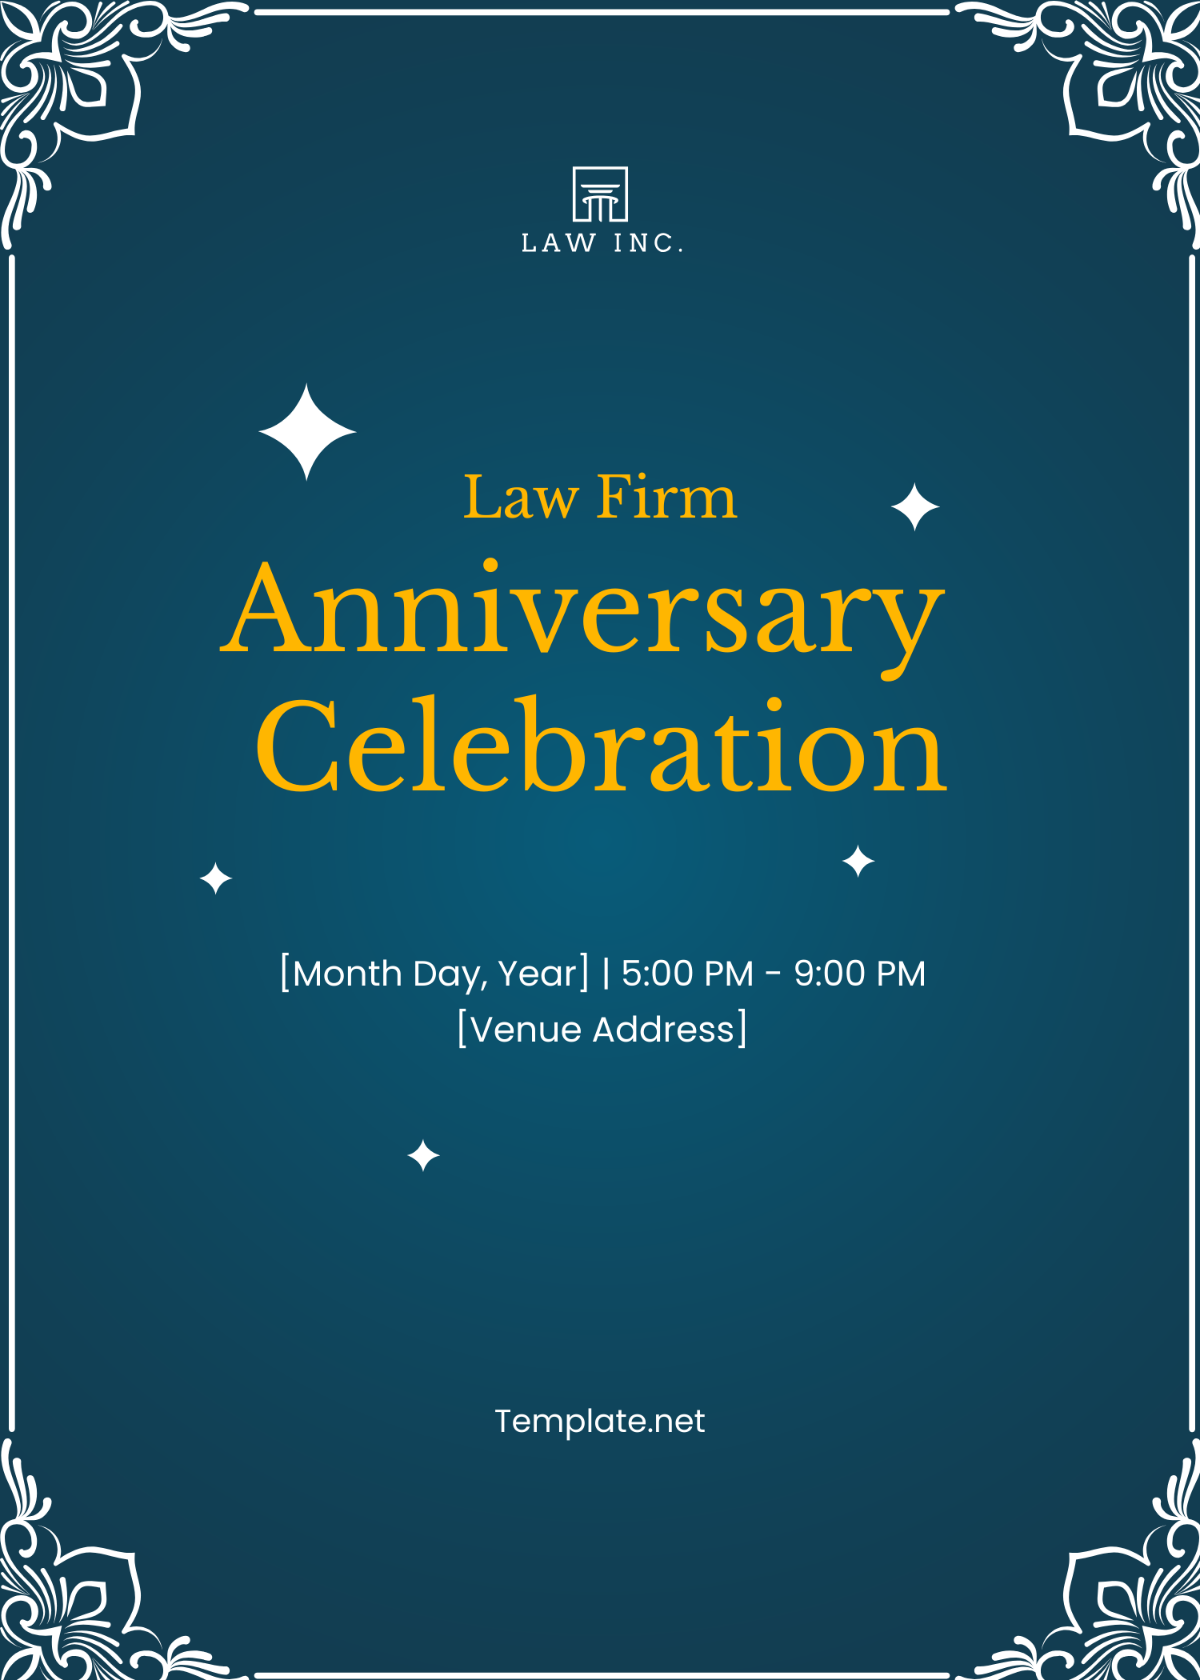 Law Firm Party Invitation Template